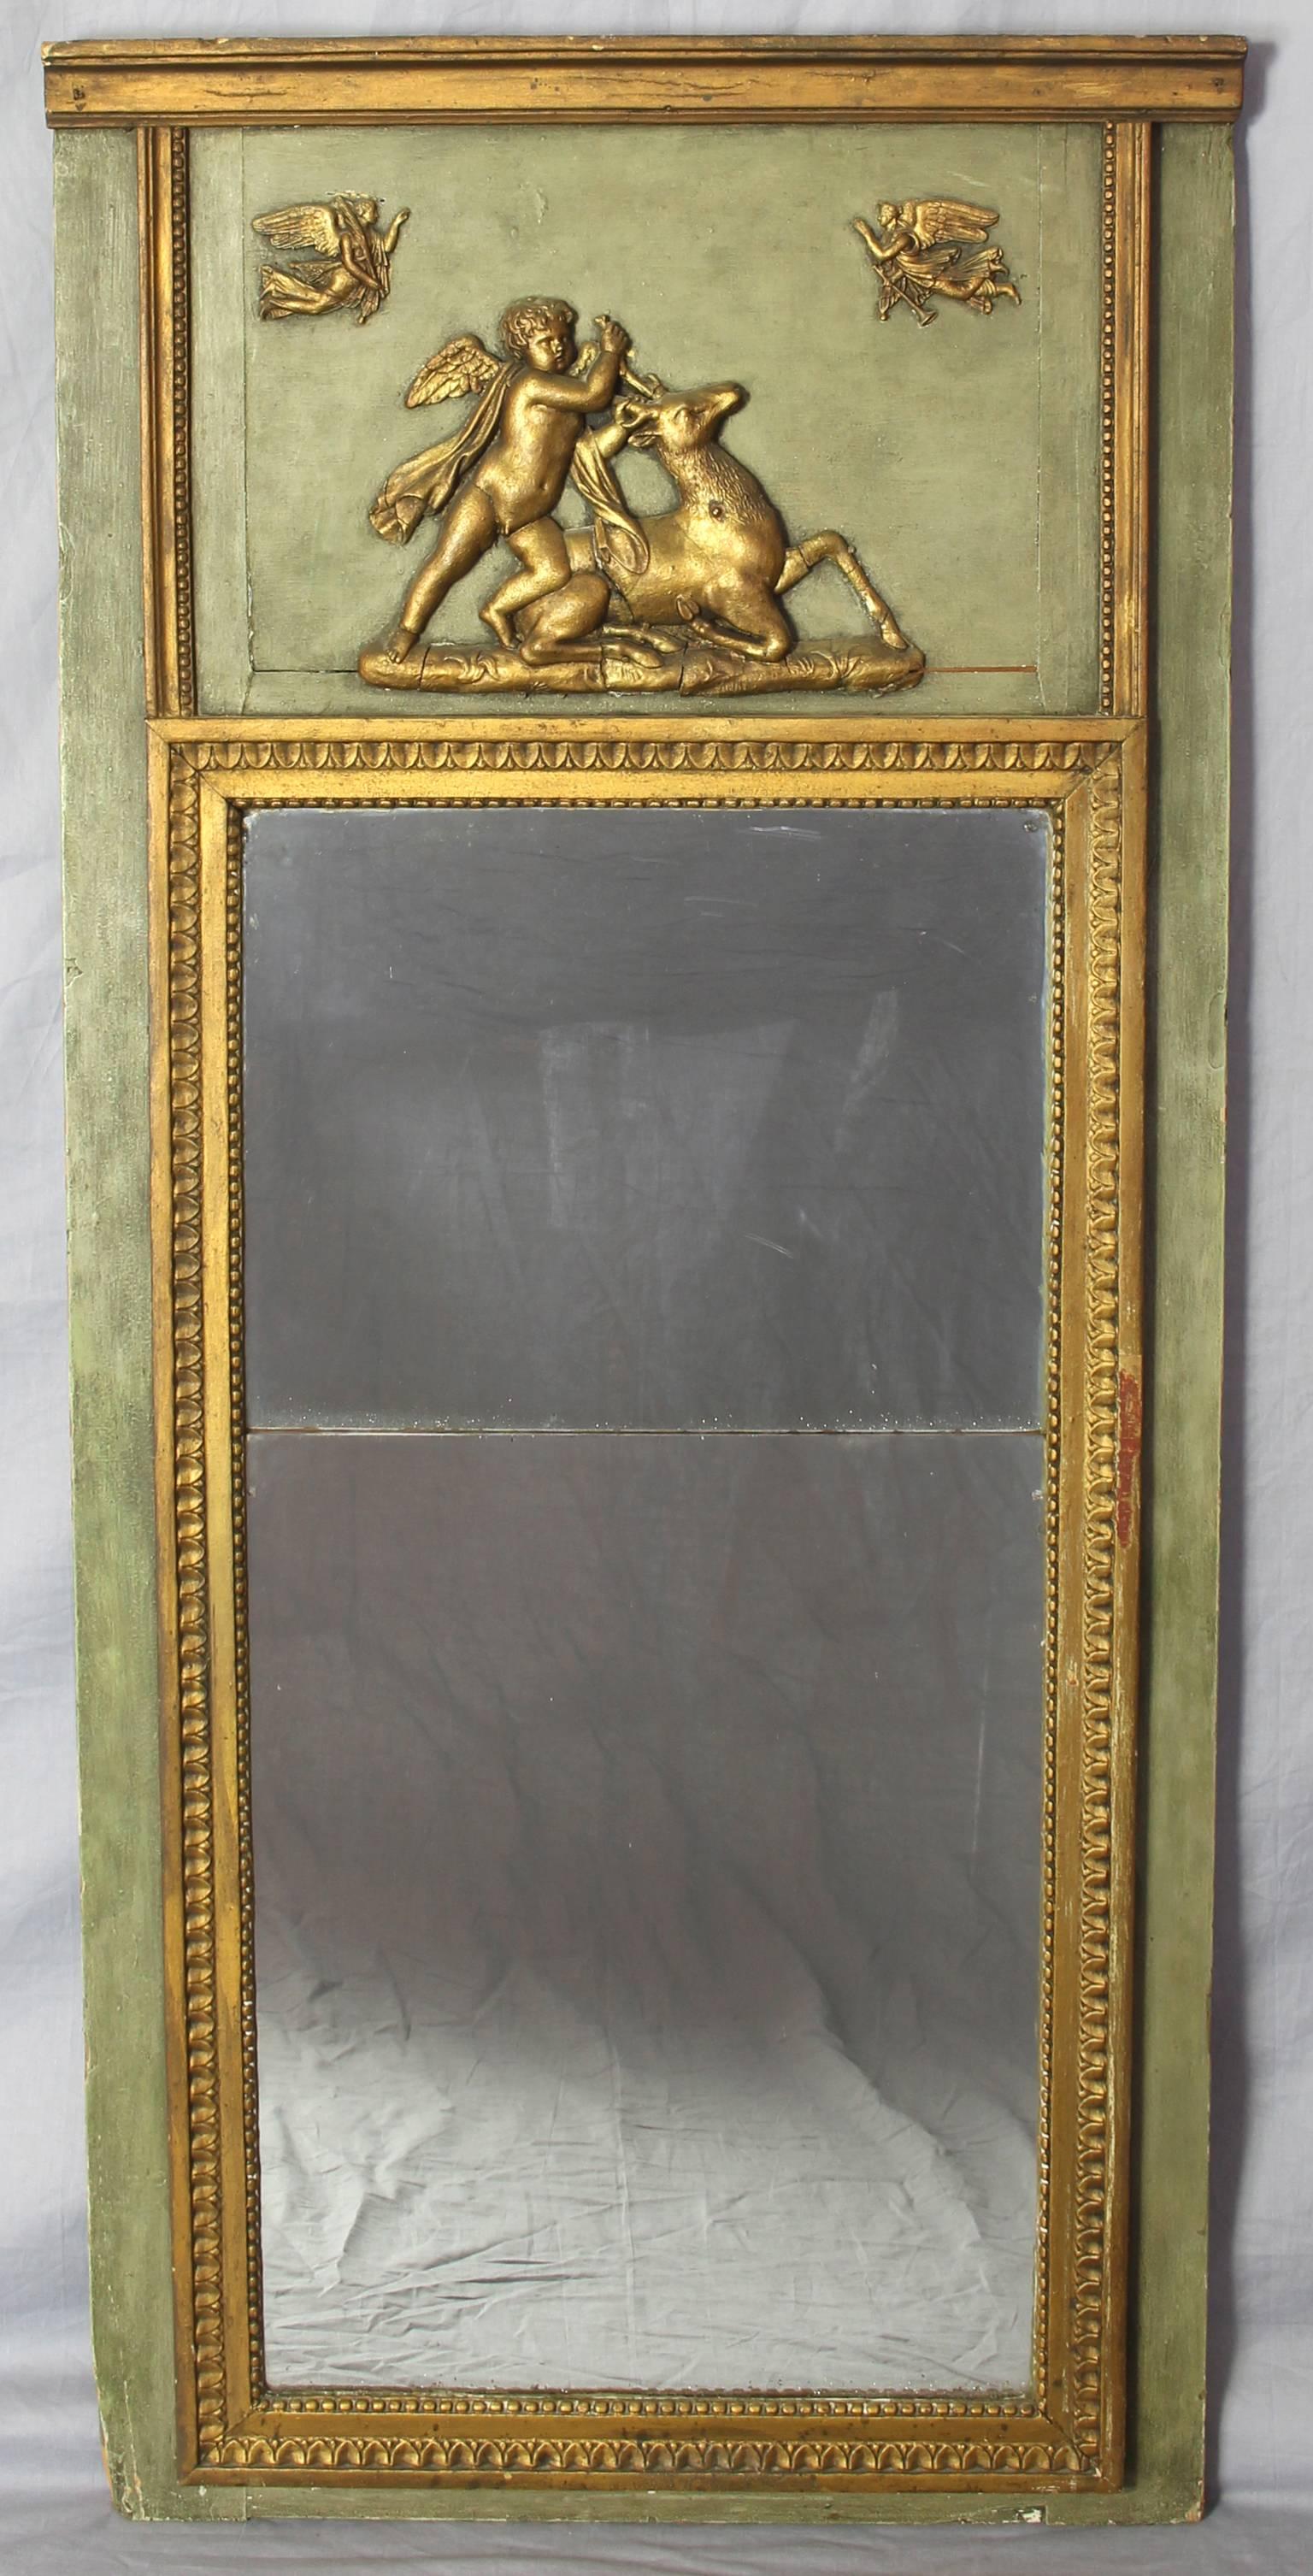 An early 19th C. French green paint and gilt decorated mirror with original glass, depicting classical motifs.